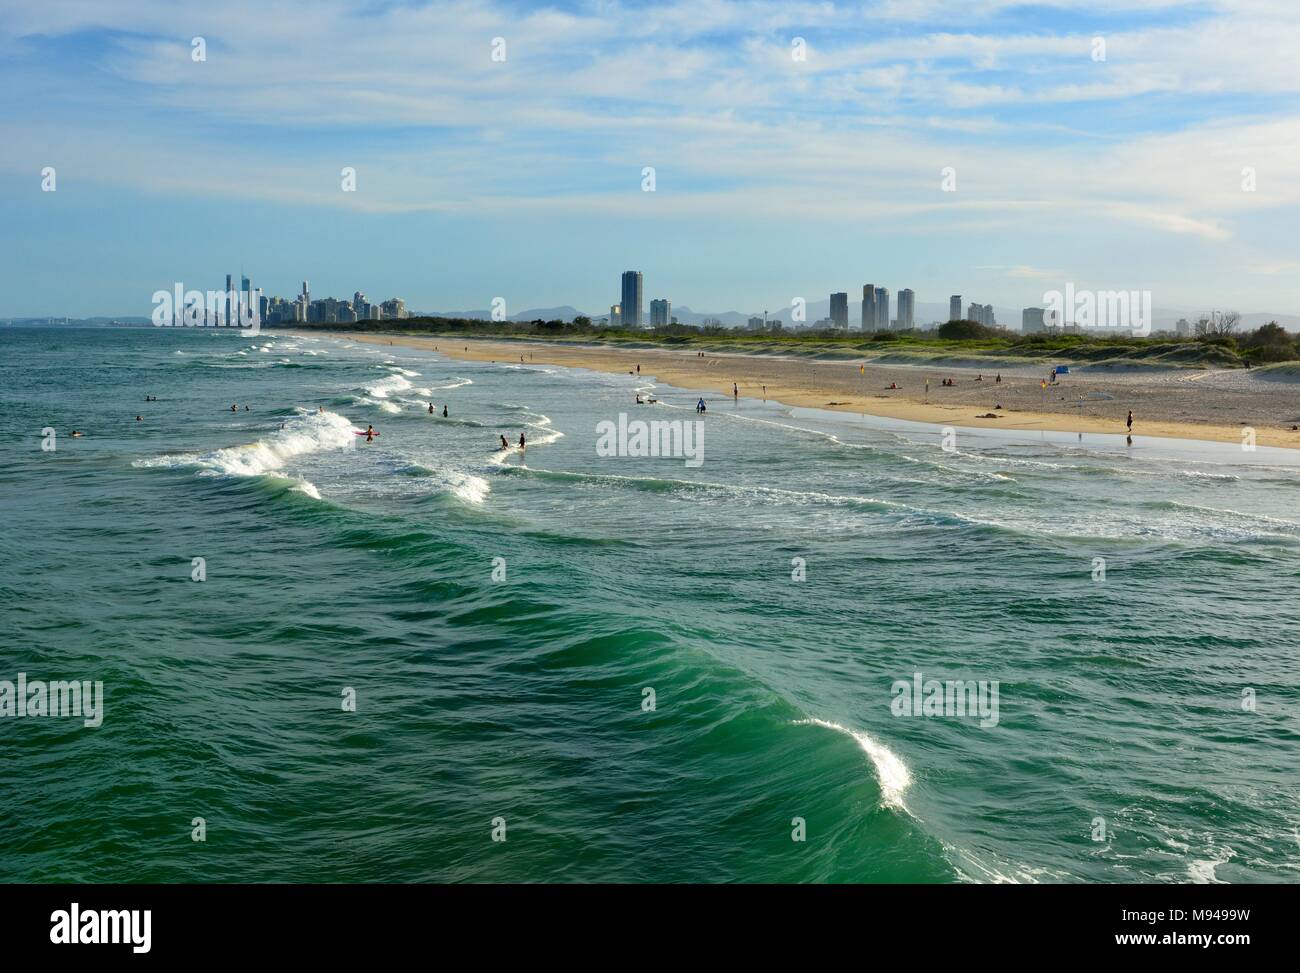 Beach at the Spit, with people and skyscrapers of Surfers Paradise in the distance. Stock Photo